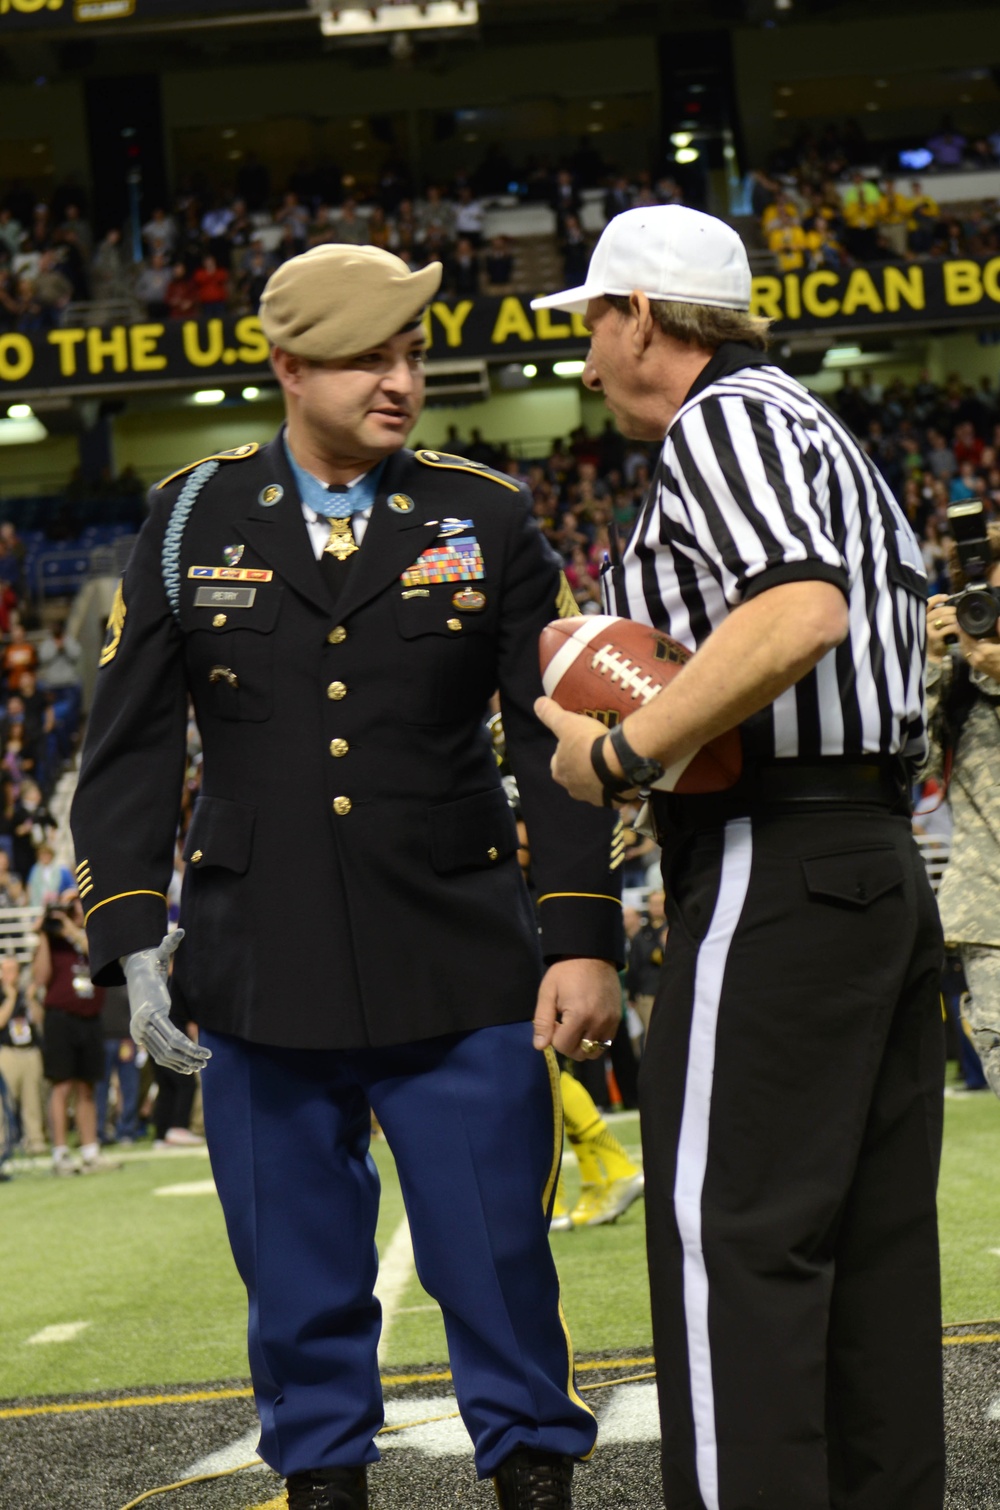 Medal of Honor Recipient delivers game ball